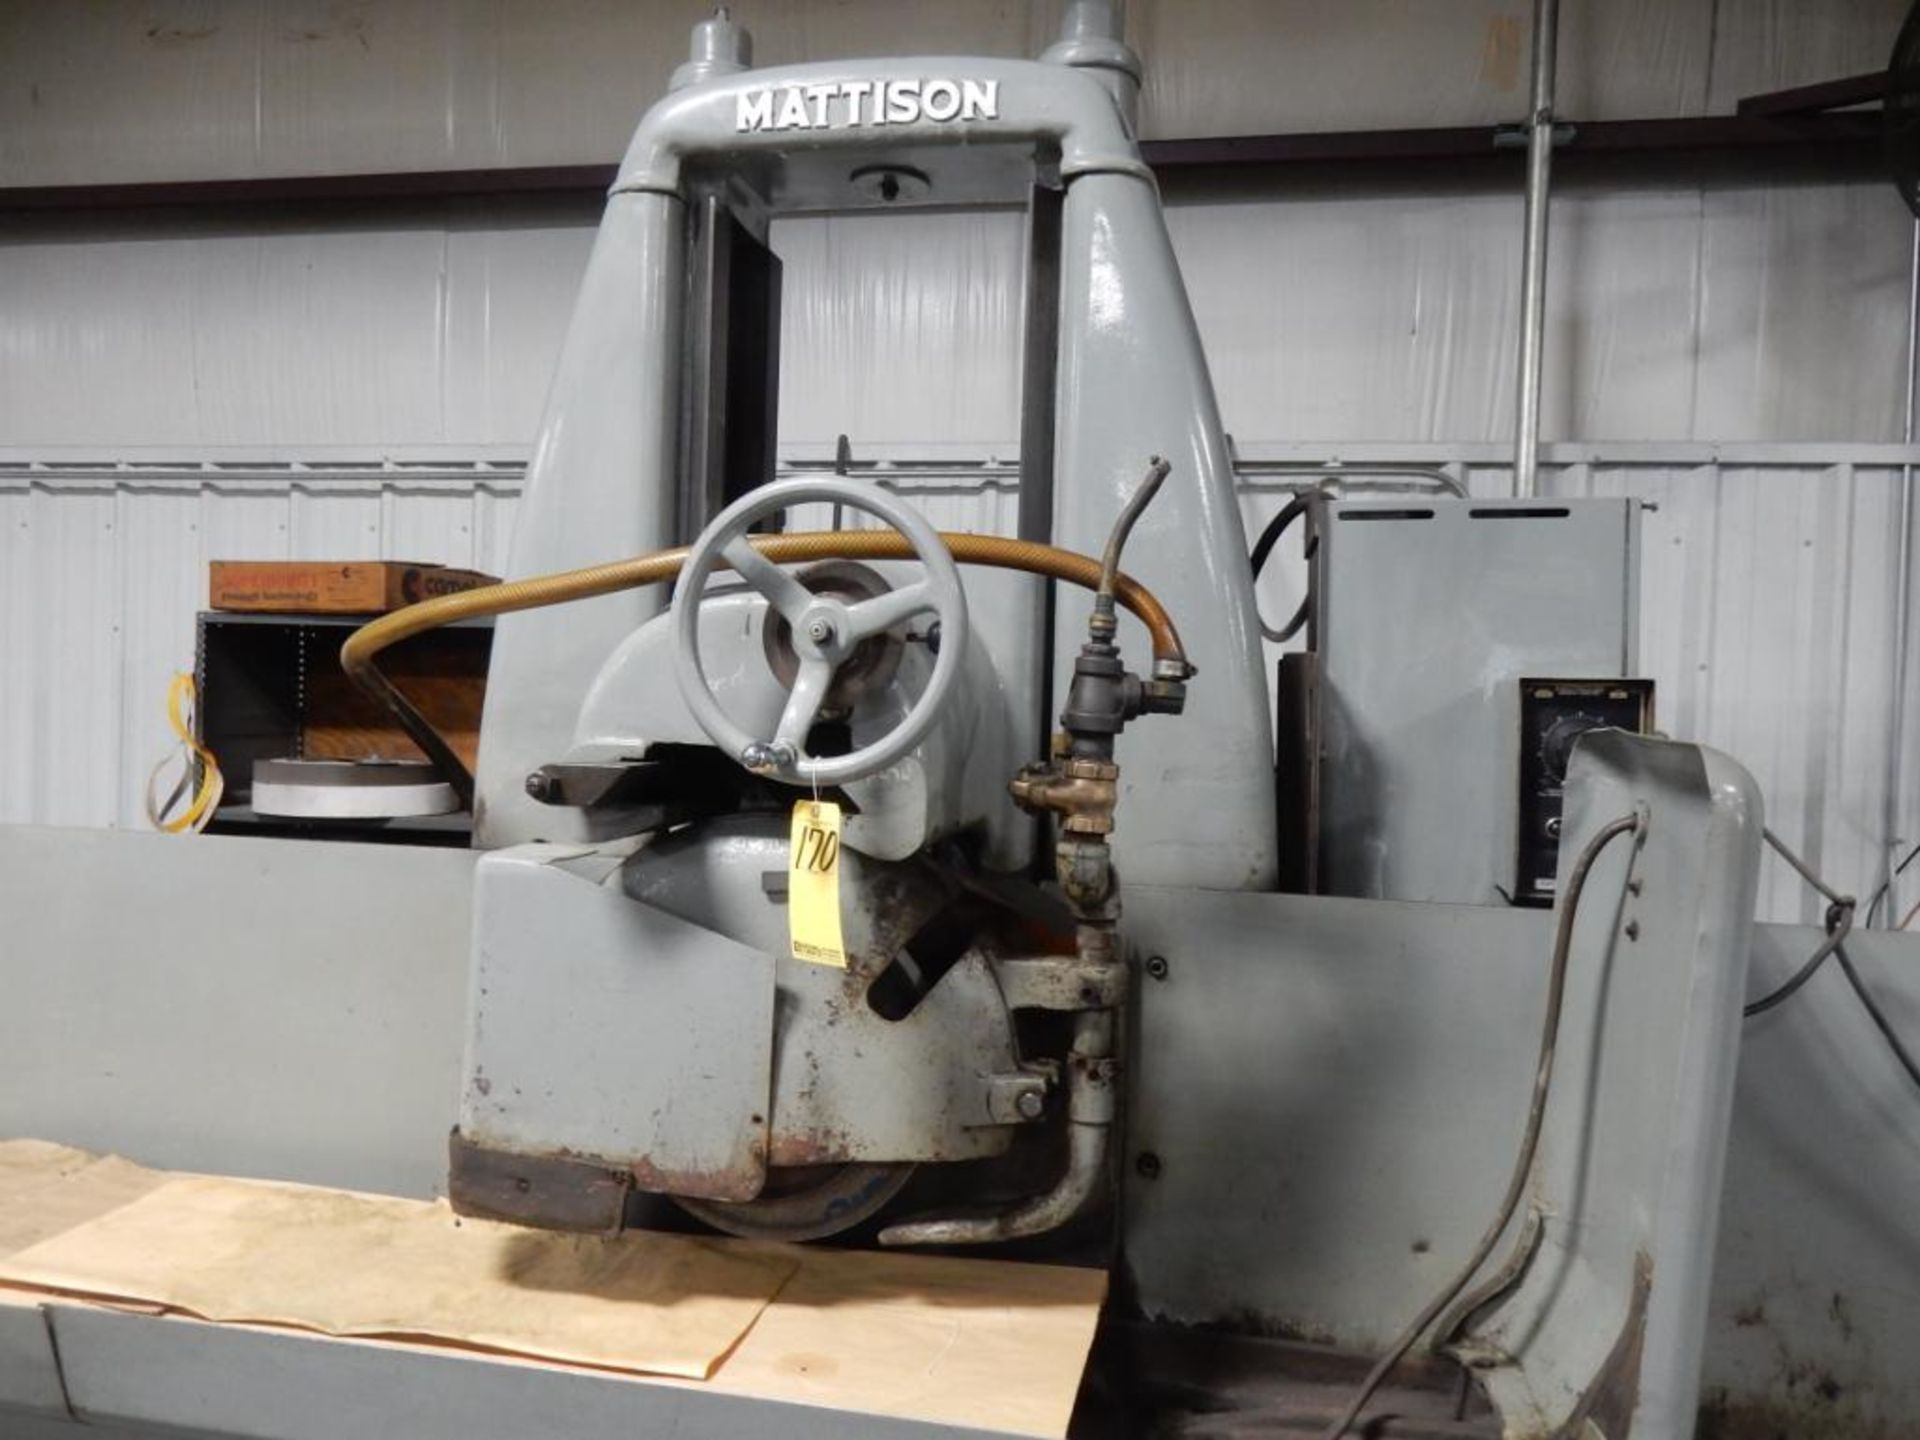 MATTISON SURFACE GRINDER, 14.5" X 72" MAGNETIC CHUCK, 2" X APPROX. 16" WHEEL, 15 HP, KLEENALL MAGNET - Image 3 of 3